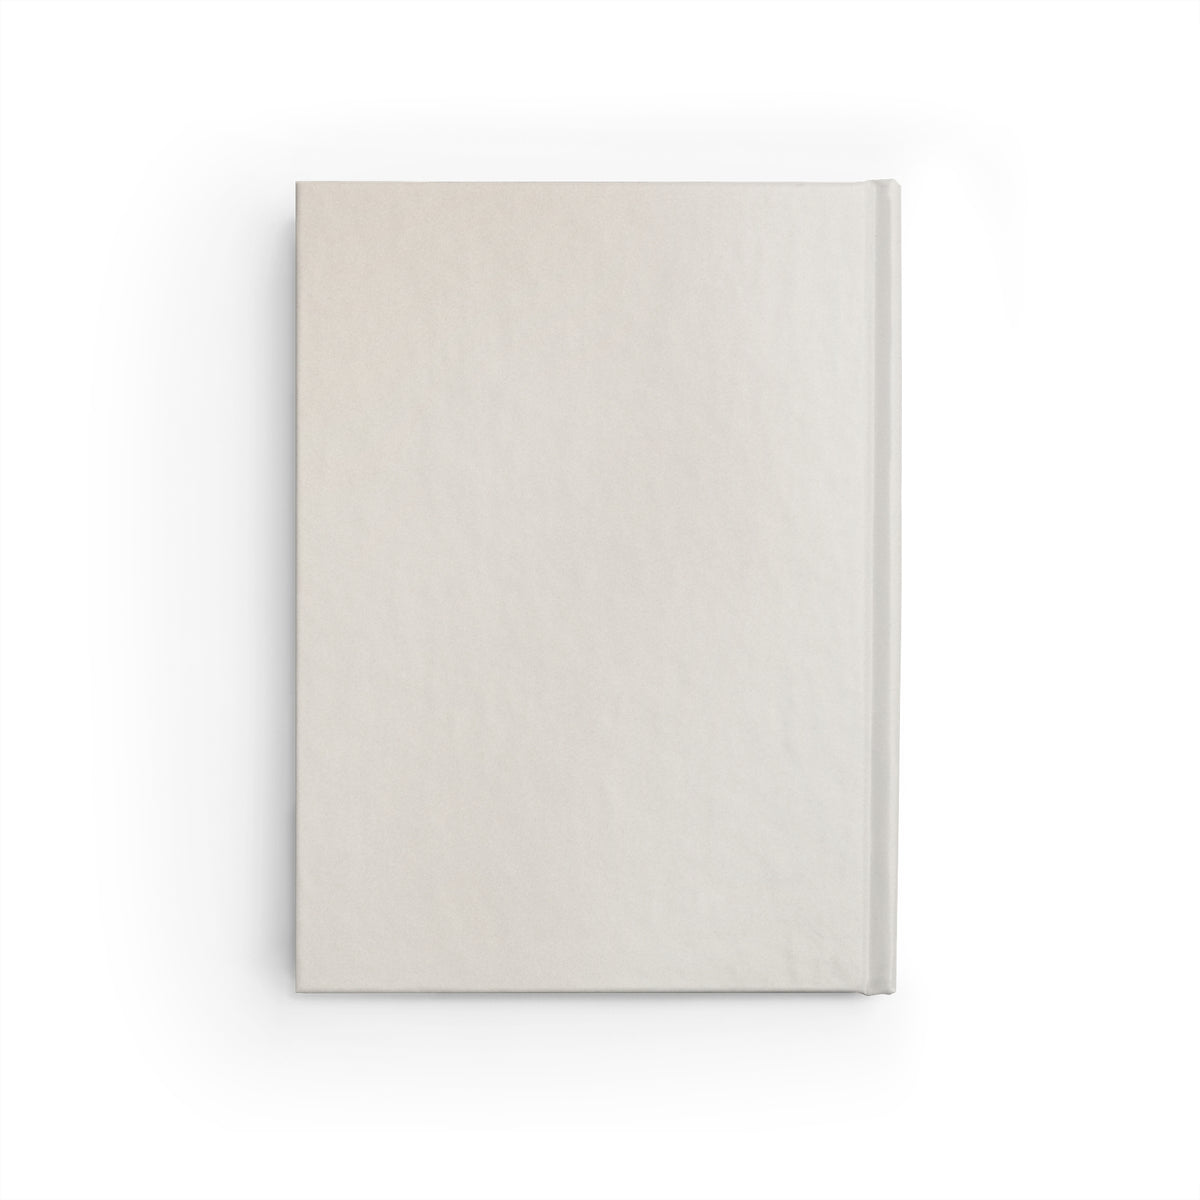 BECOME HER NOW | Blank Lined Journal | Beige Ruled Notebook